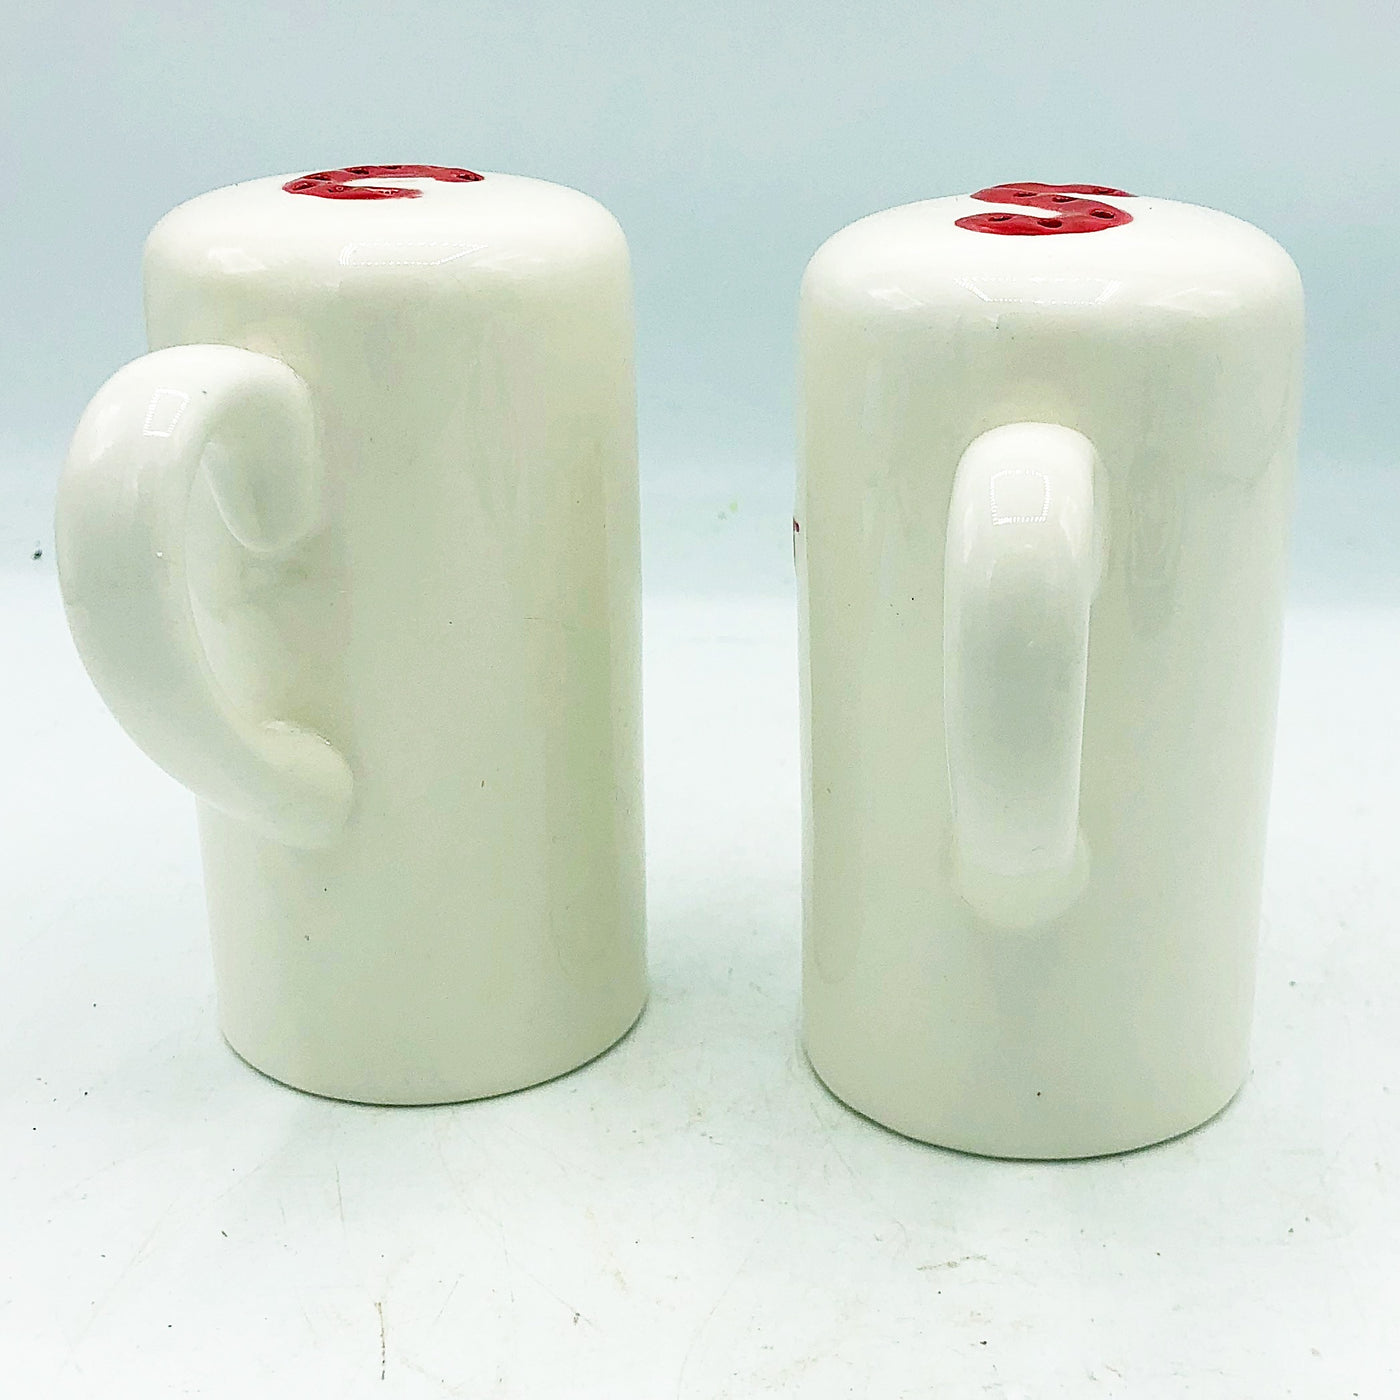 💙 Salt and Cheese Popcorn Shakers Tall Red and White Set of 2